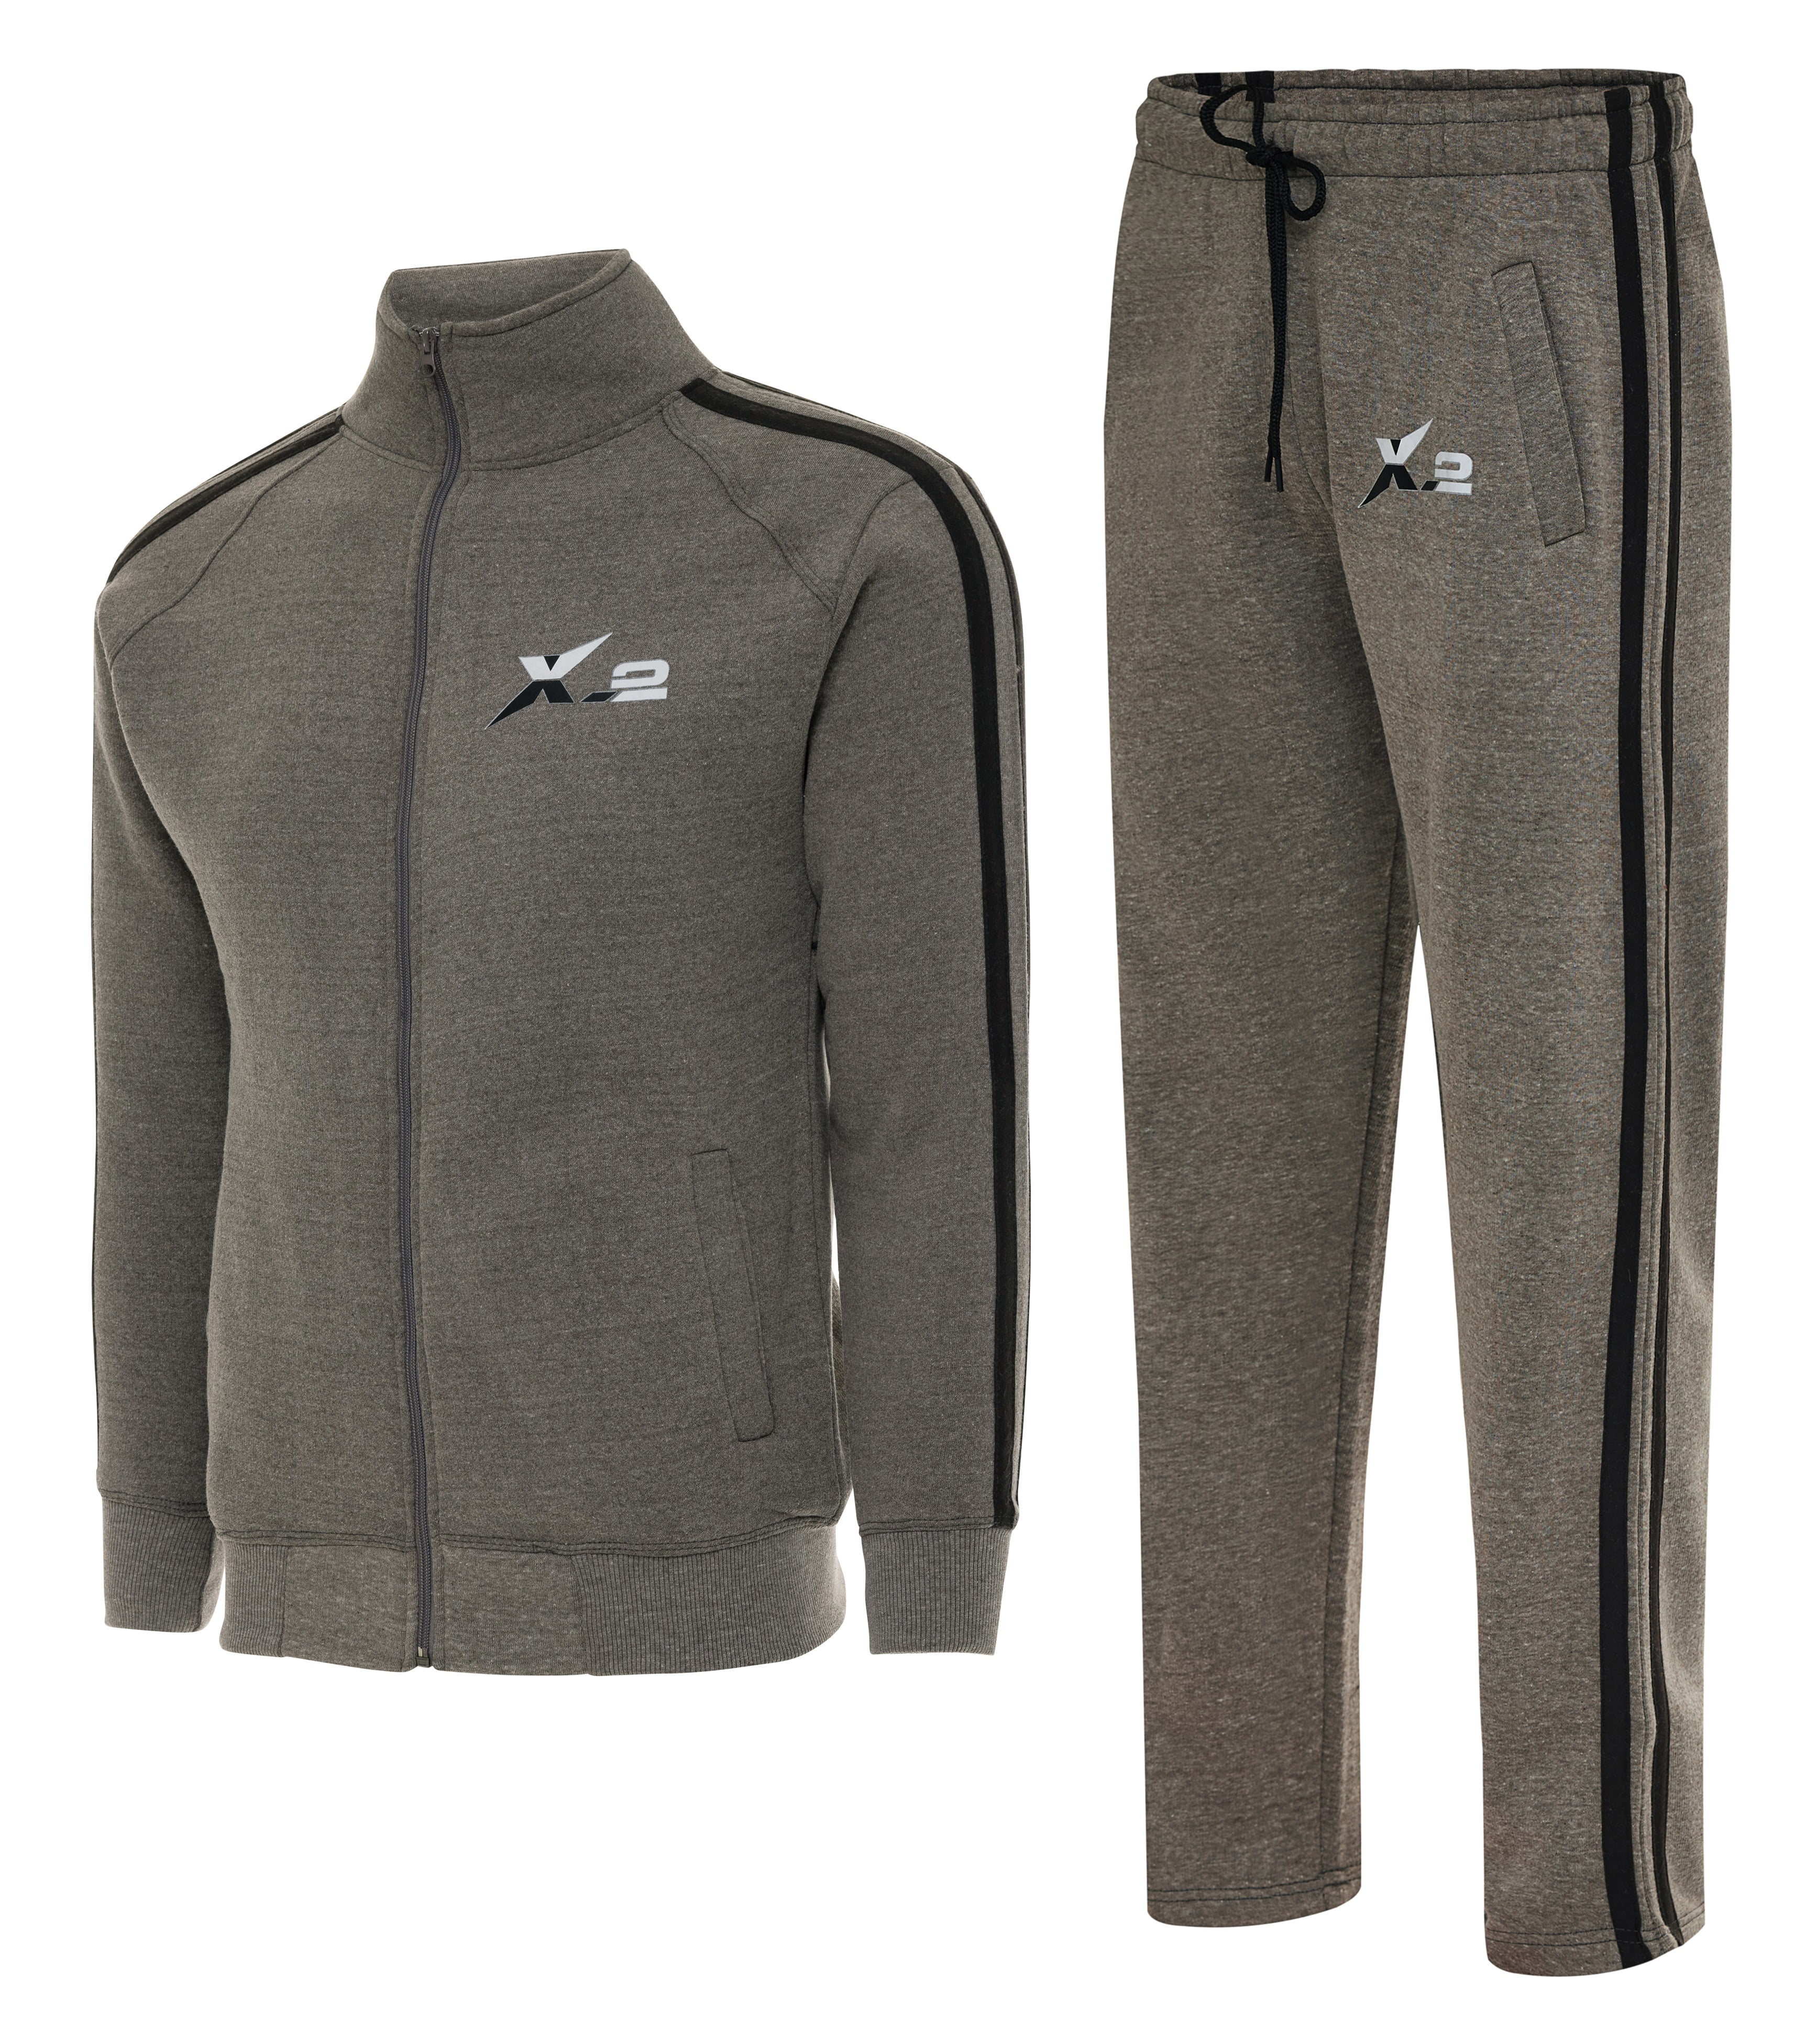 Many Styles to Choose from Mens Lightweight Soft and Durable Tracksuits and Sweatsuits 